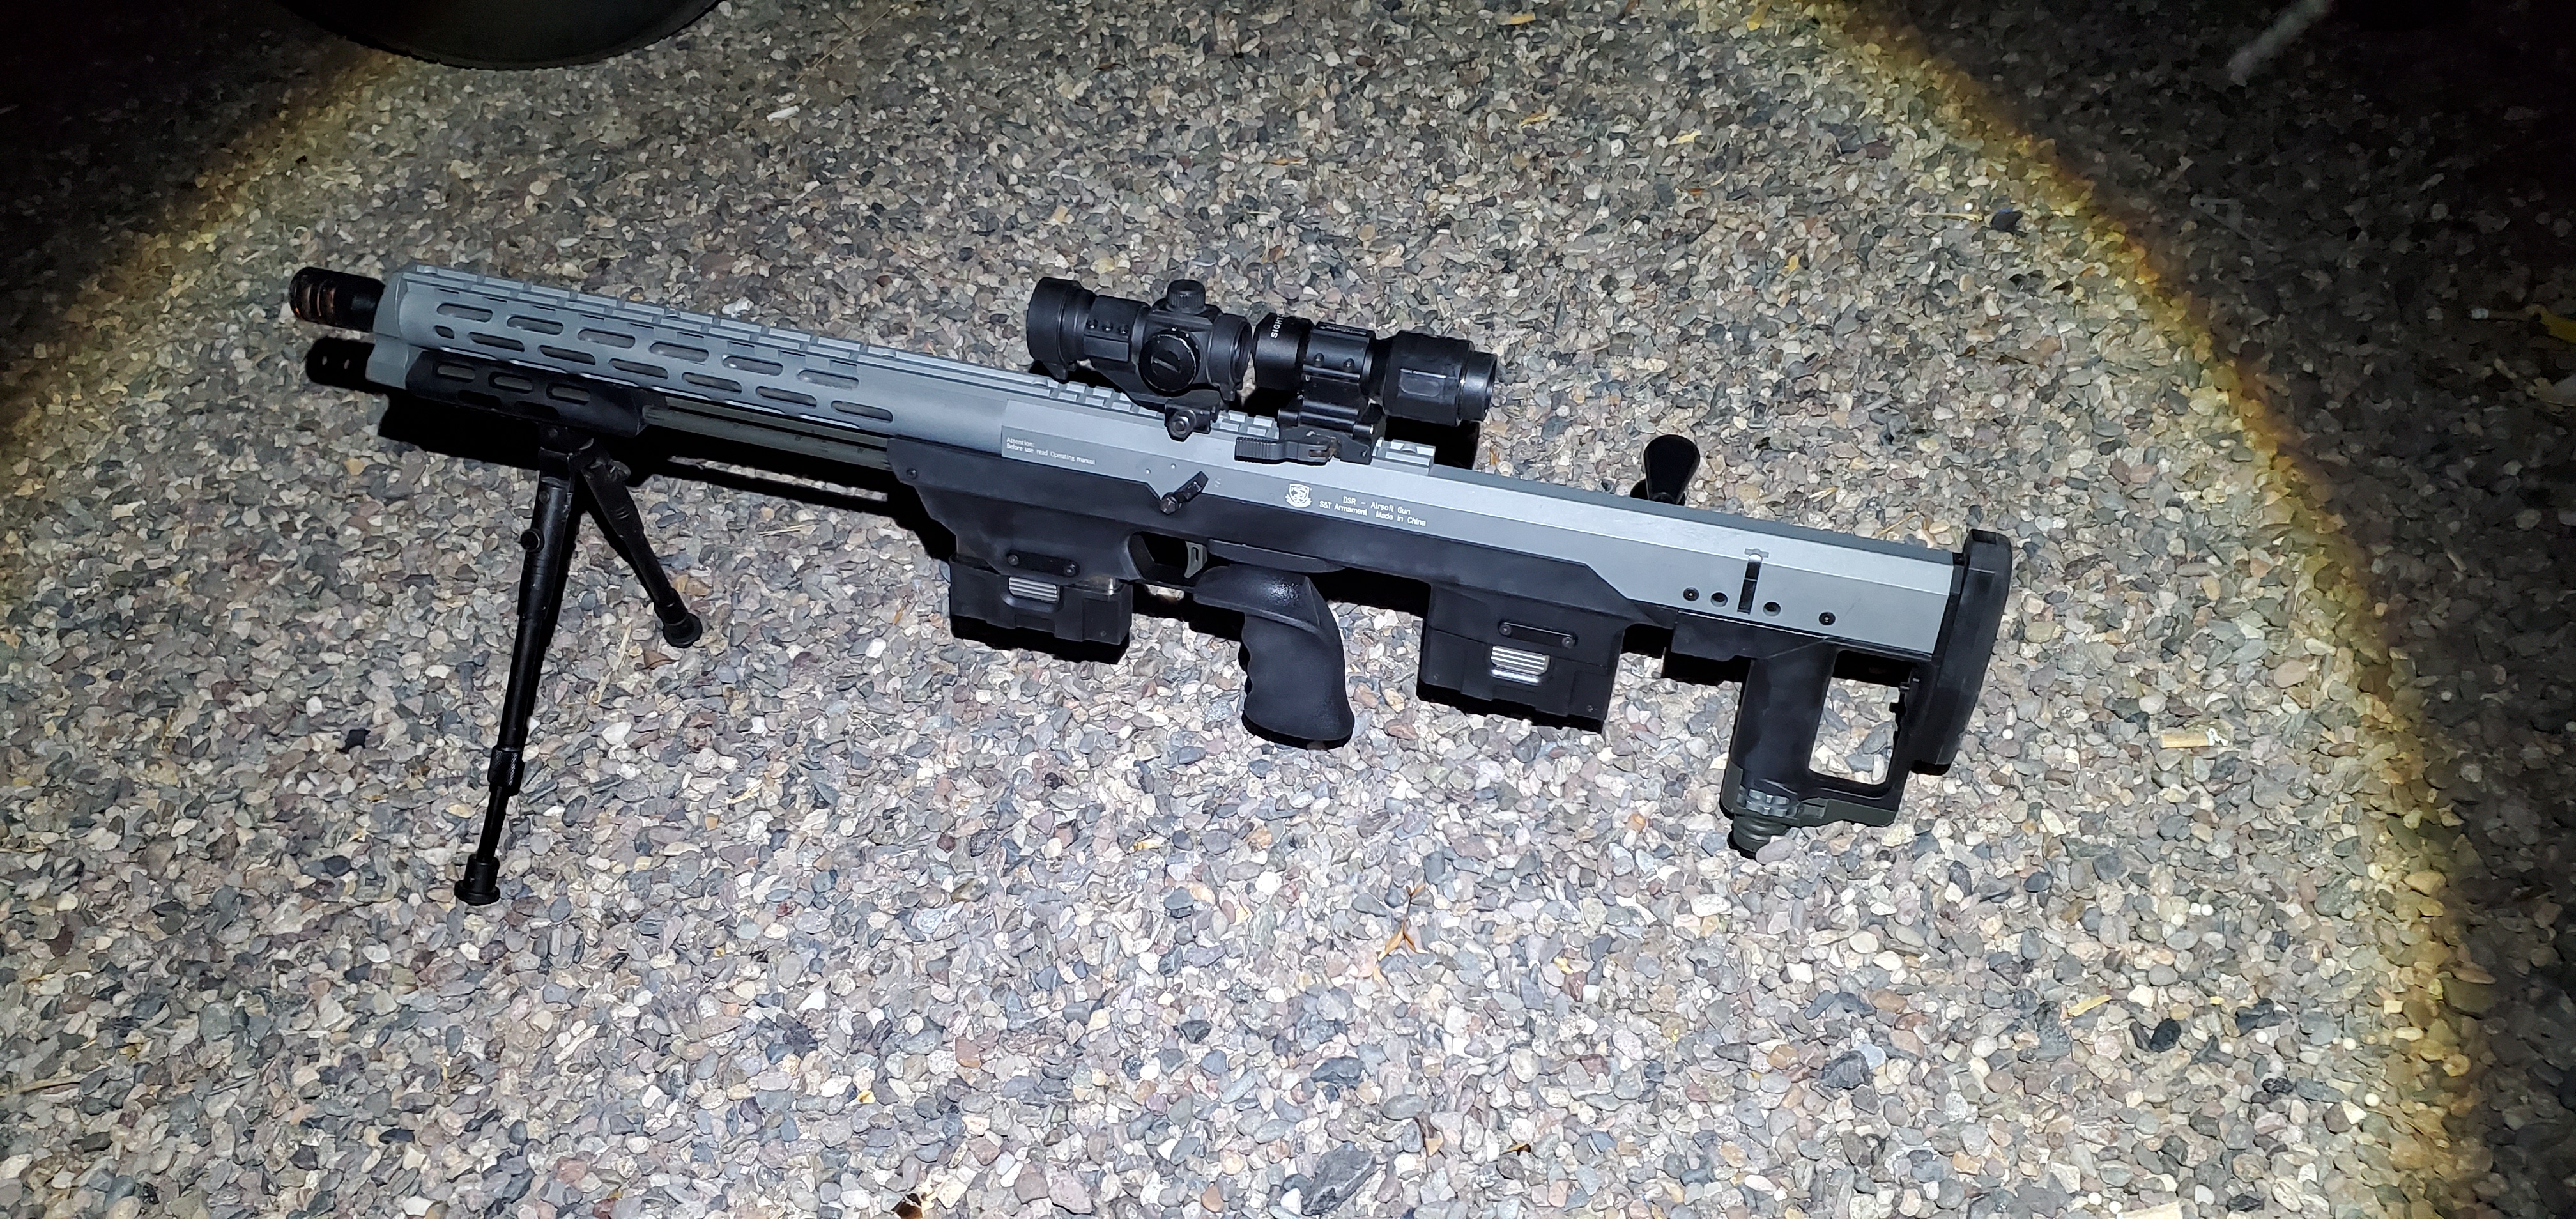 Sold Gas Dsr 1 W 3 Mags Hopup Airsoft